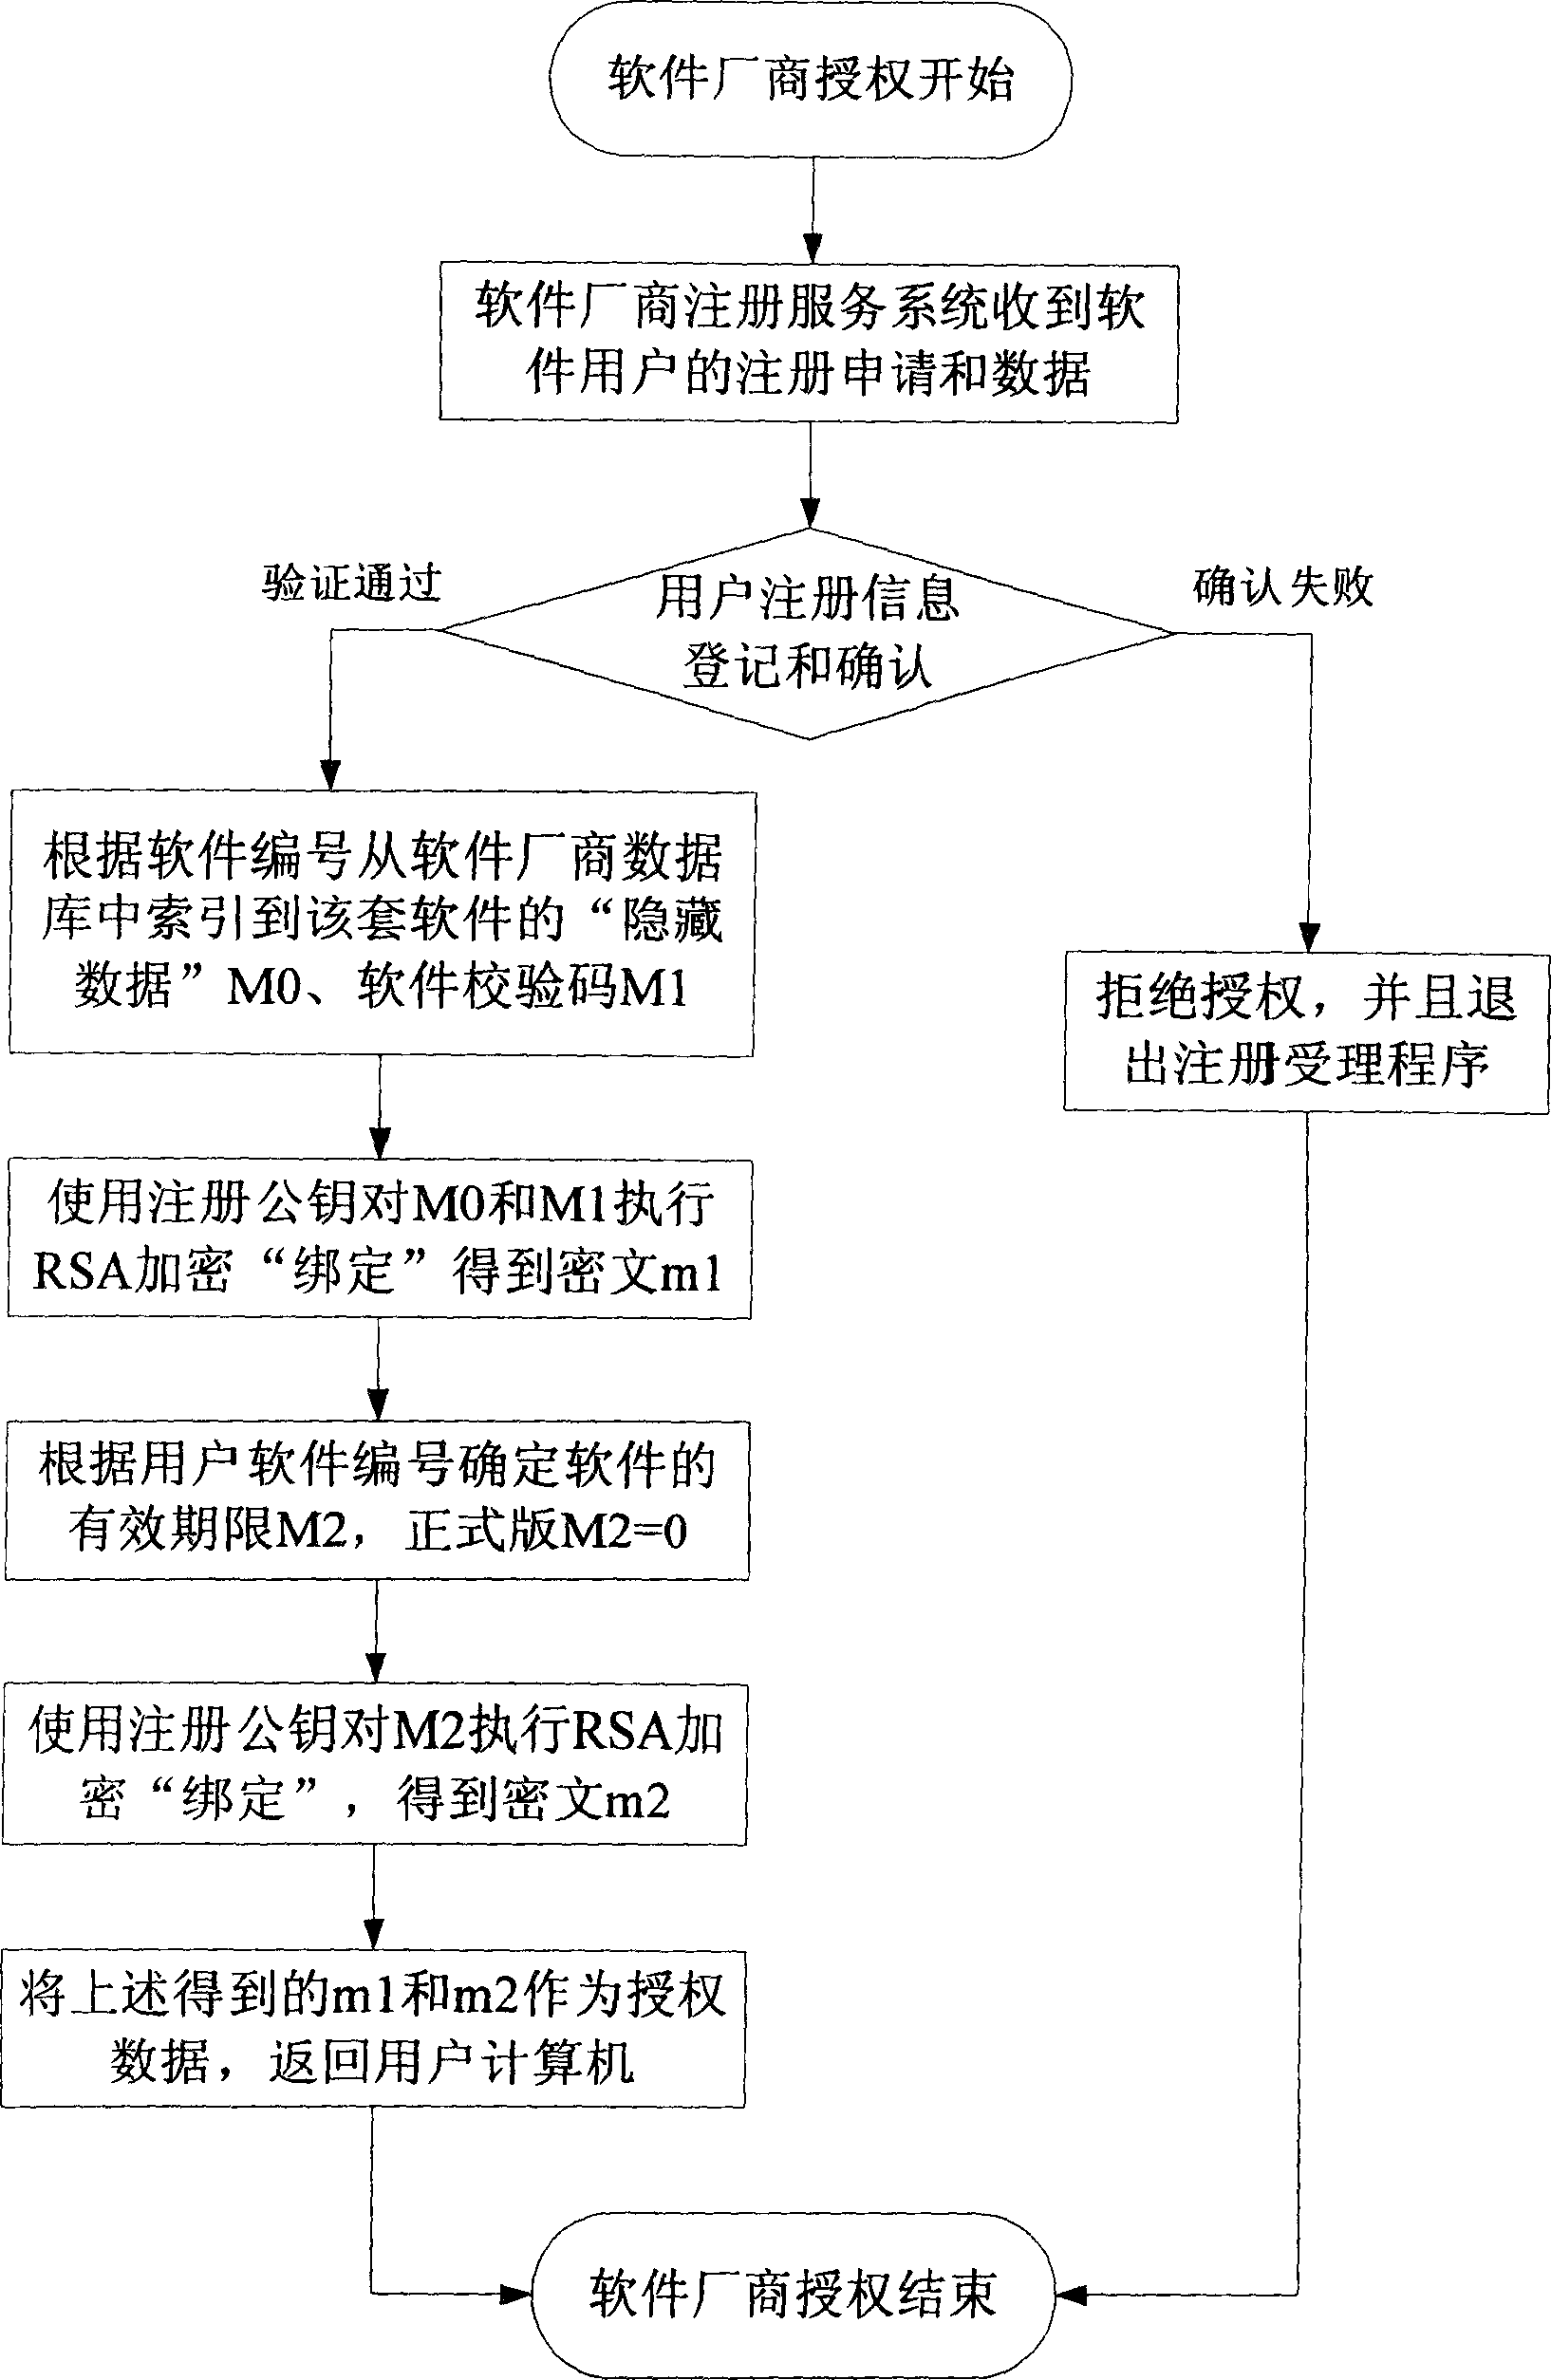 Method for realizing computer software intruder preventing edition based on confidence computation module chip